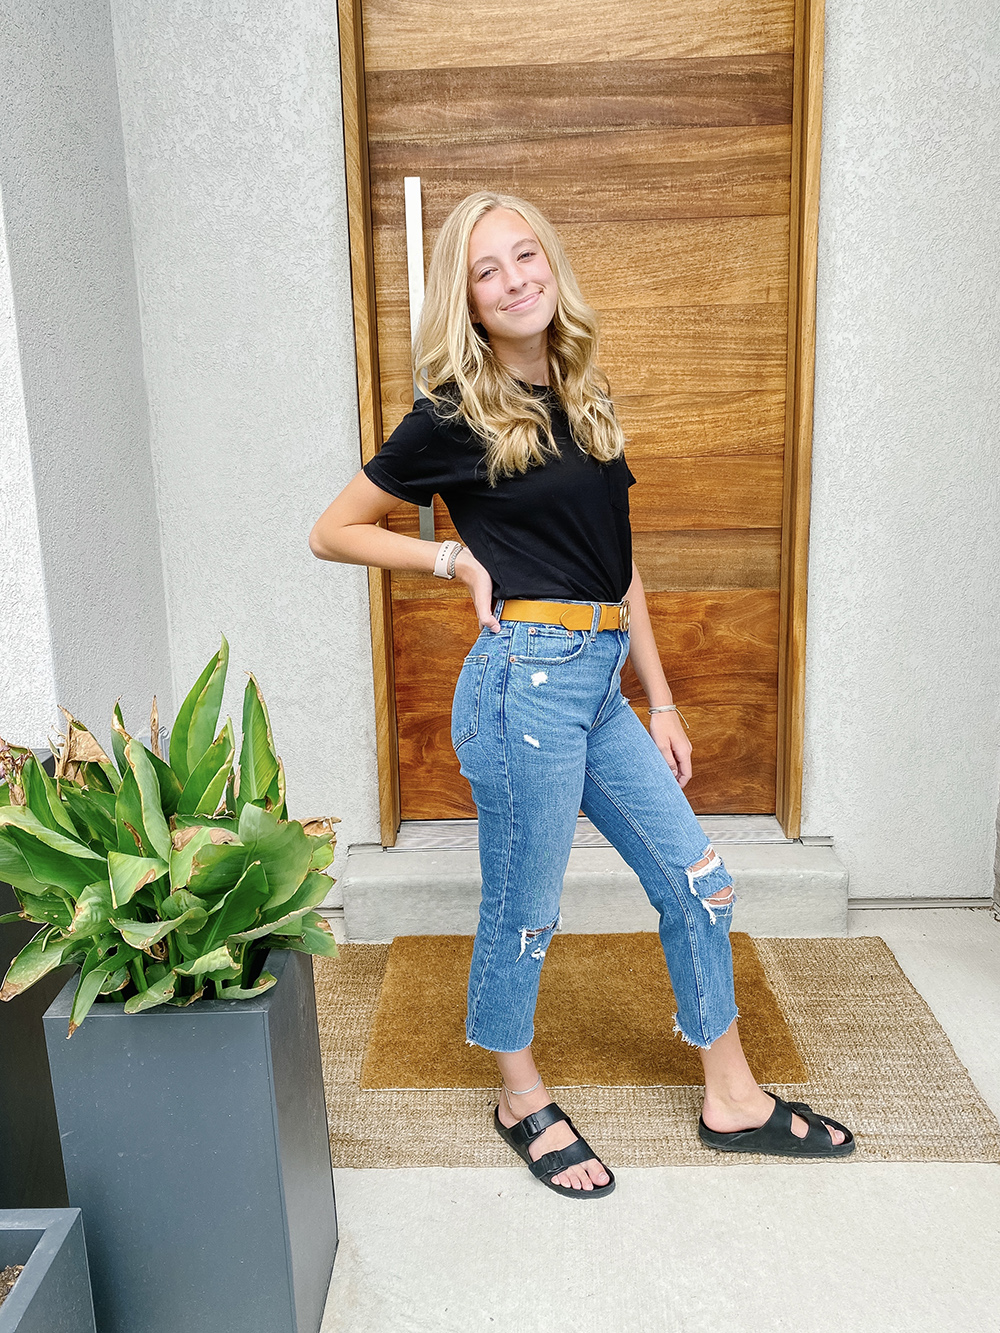 kailee wright Hunter Wright teen back to school clothes